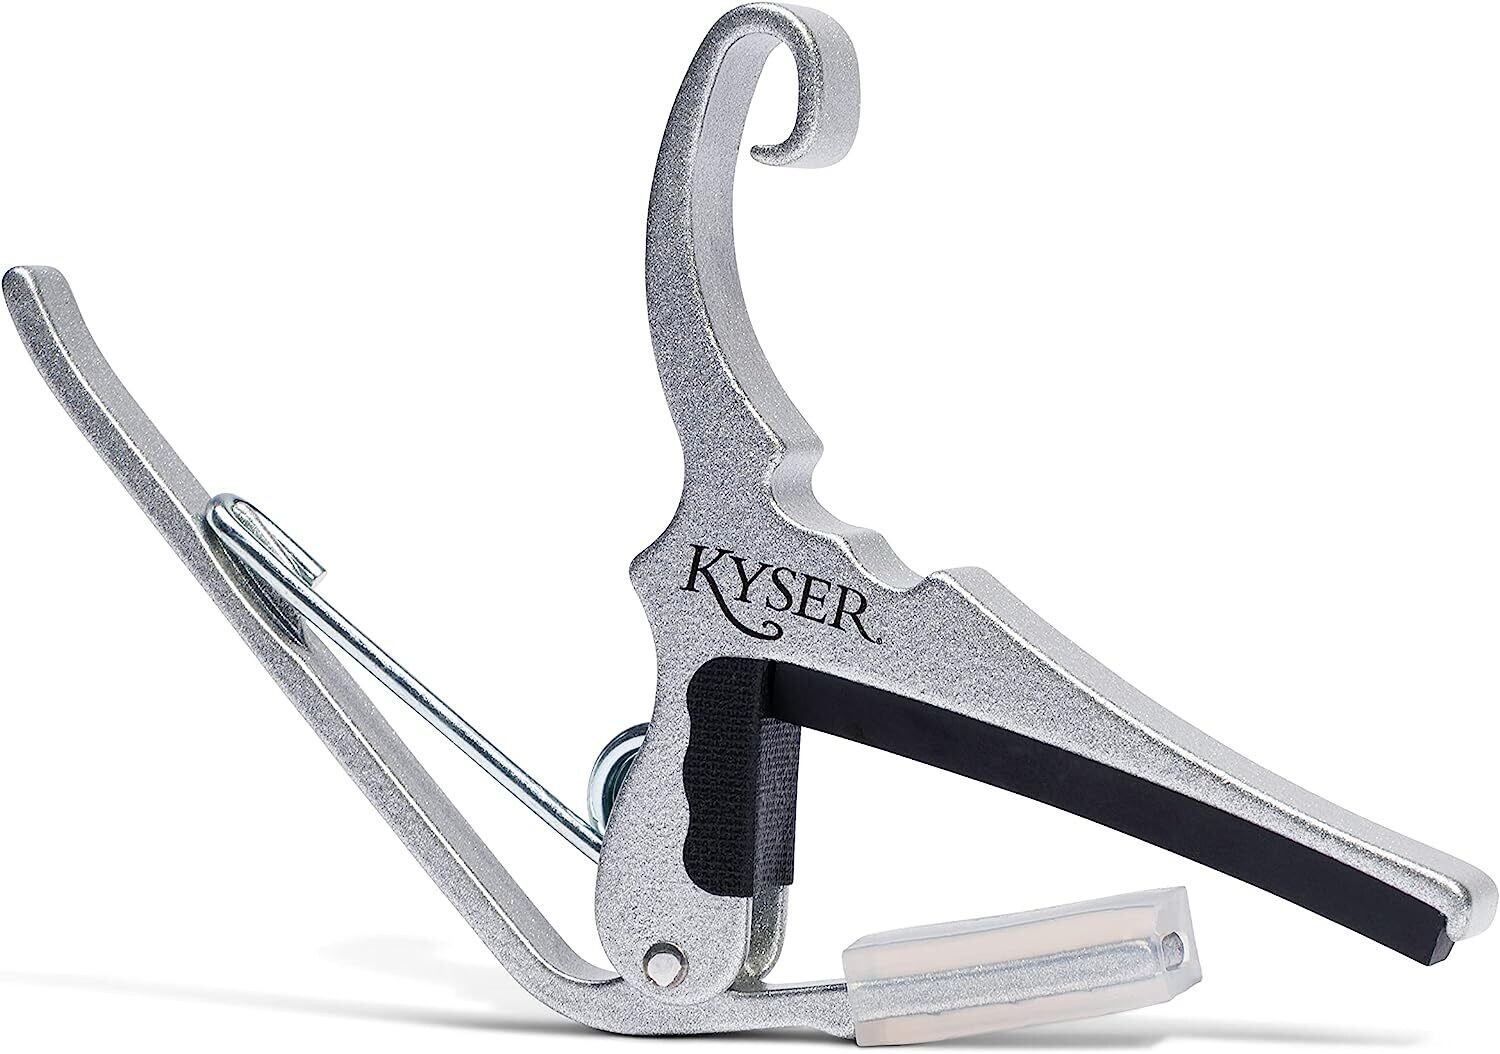 Kyser Quick-Change Capo for 6 String Acoustic Guitars Silver KG6SA Free Shipping